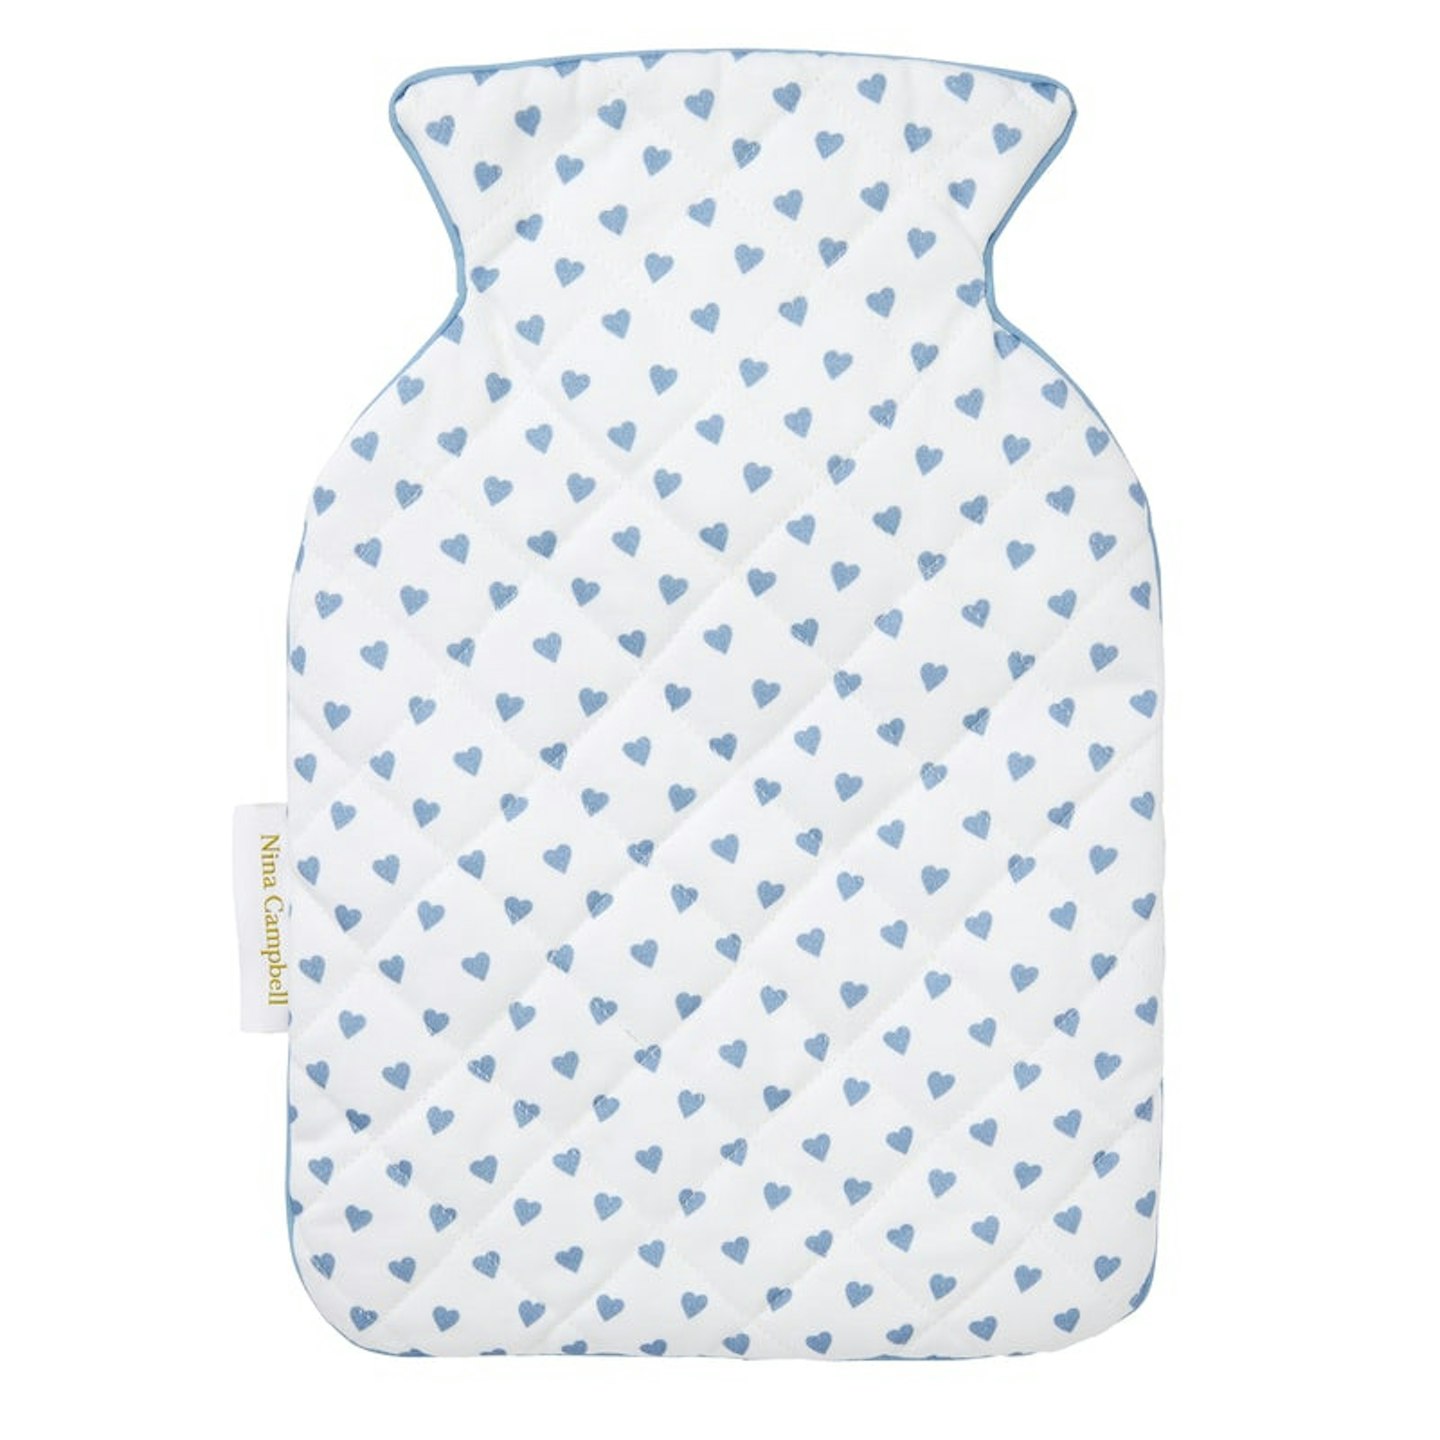 Wednesday – Nina Campbell, Hot Water Bottle Cover, £32